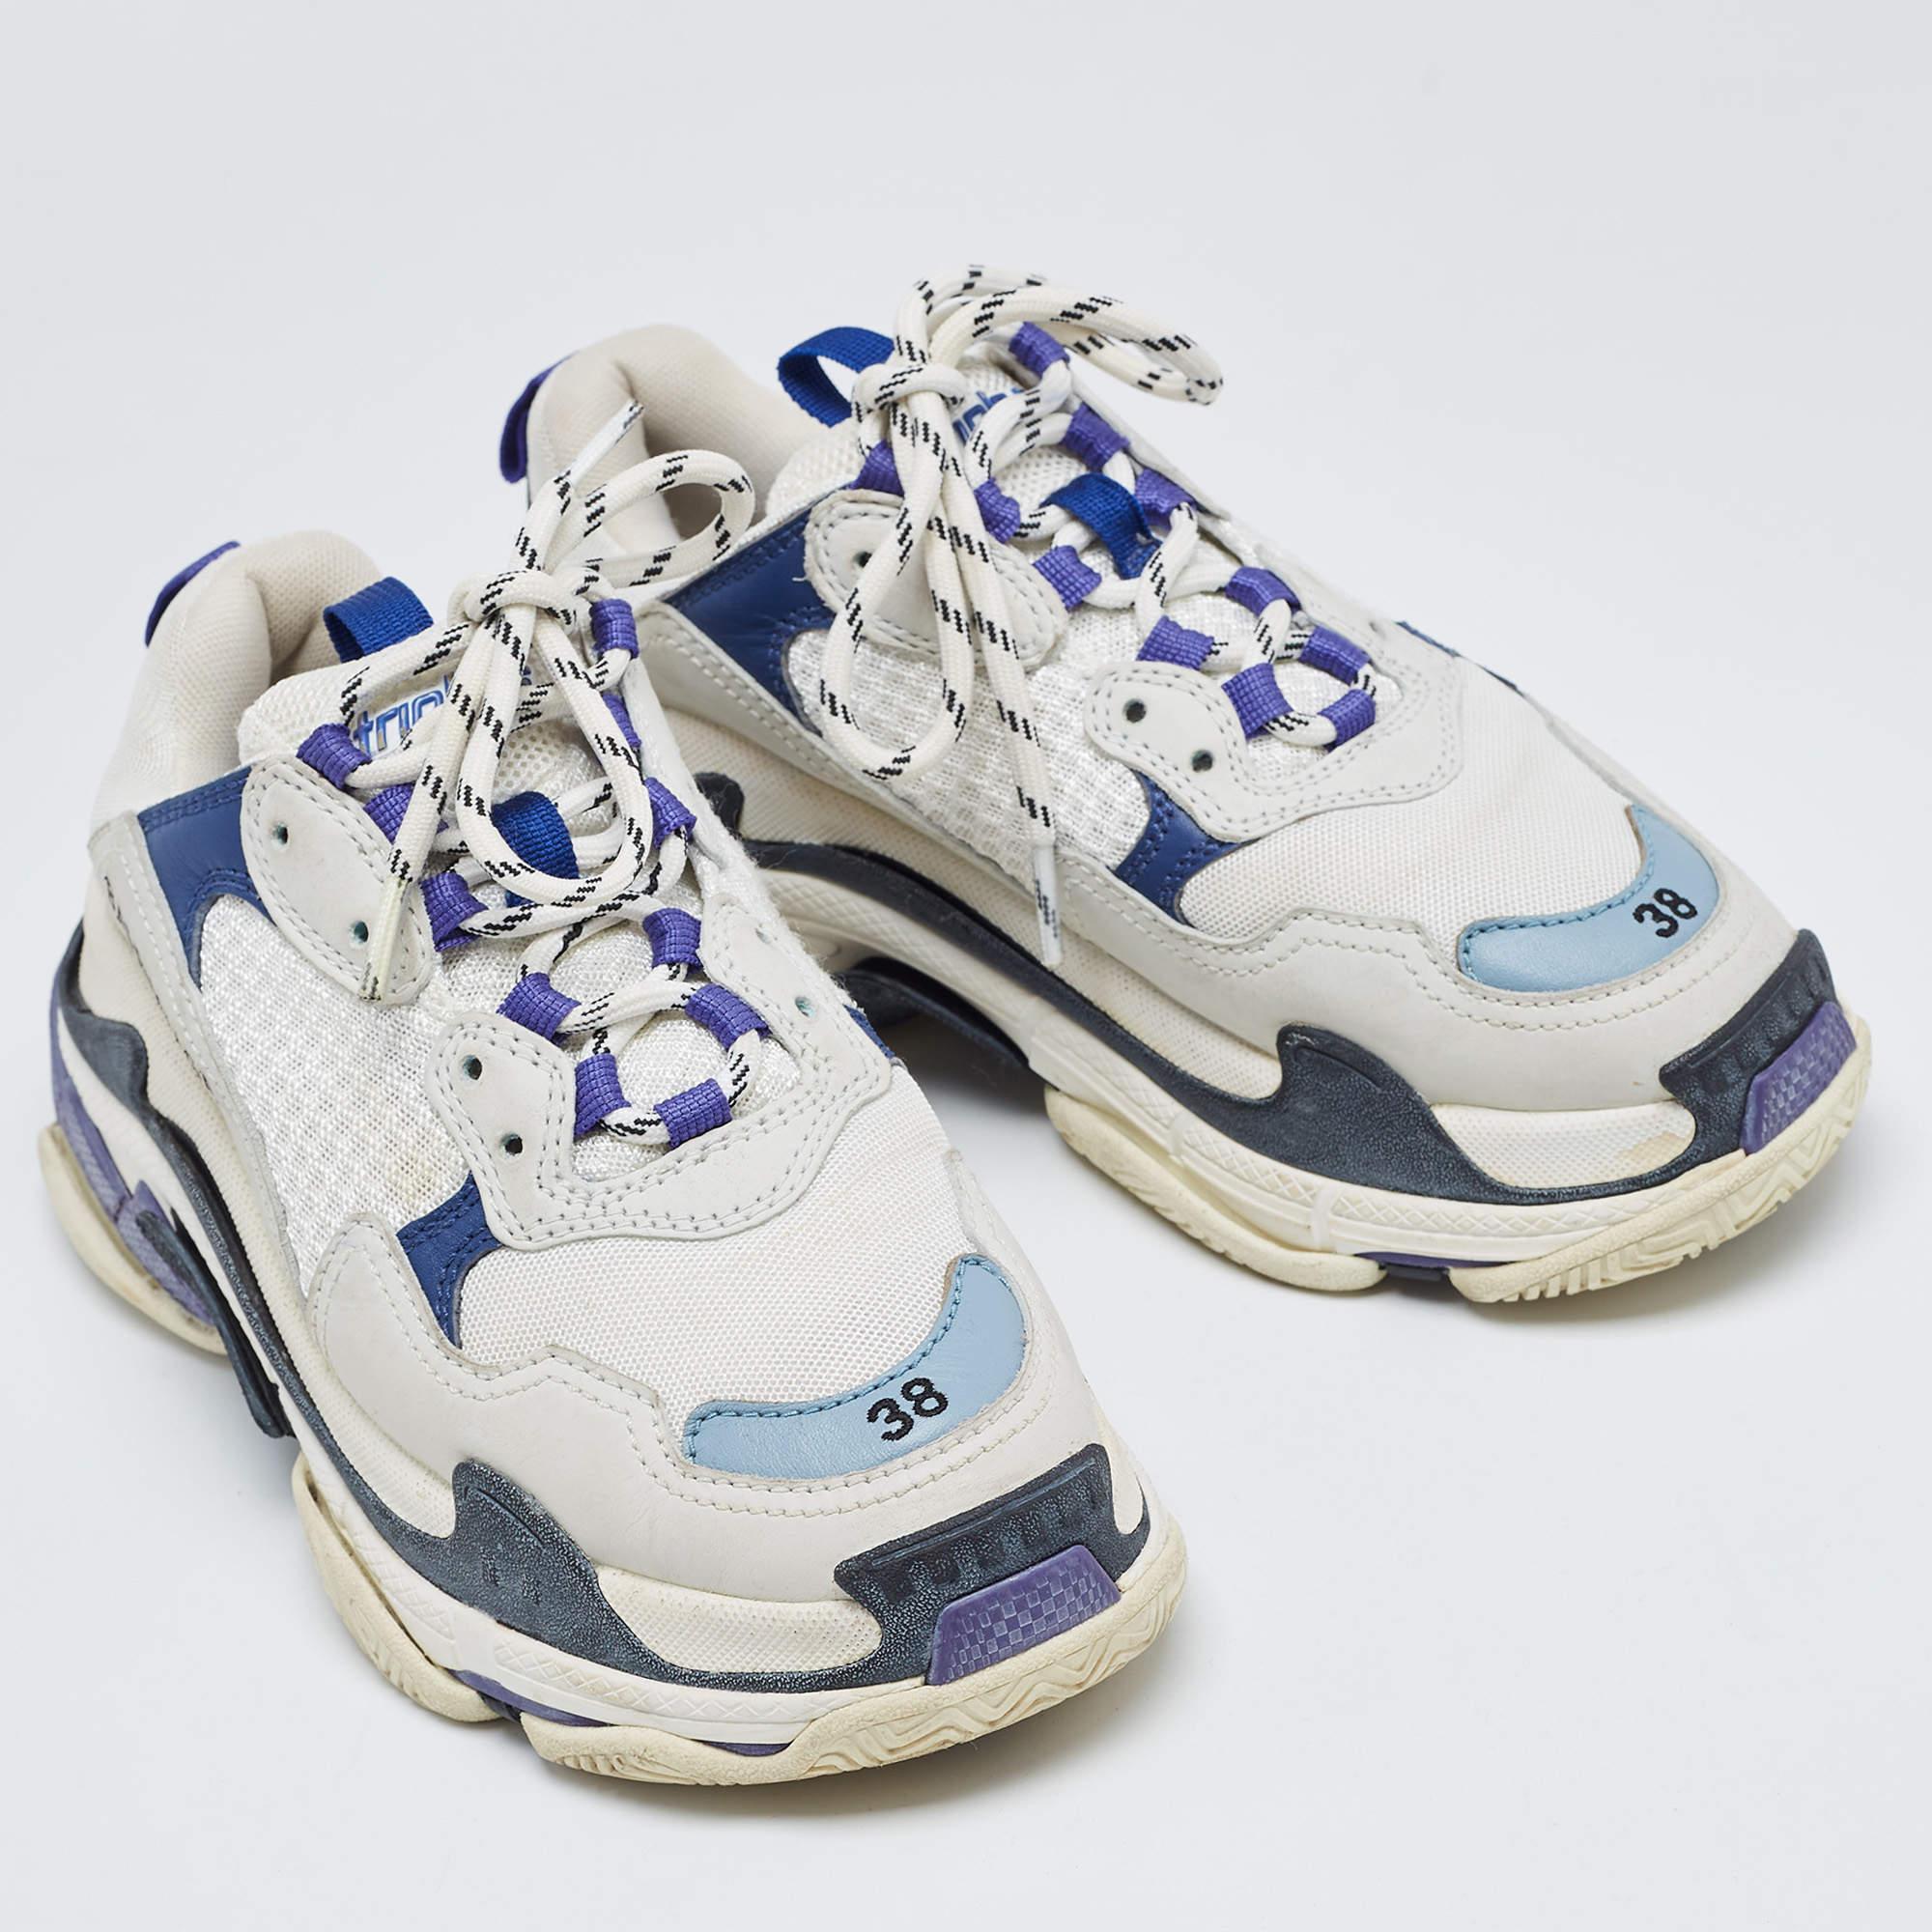 Balenciaga White/Blue Nubuck Leather and Mesh Triple S Sneakers Size 38 For Sale 4